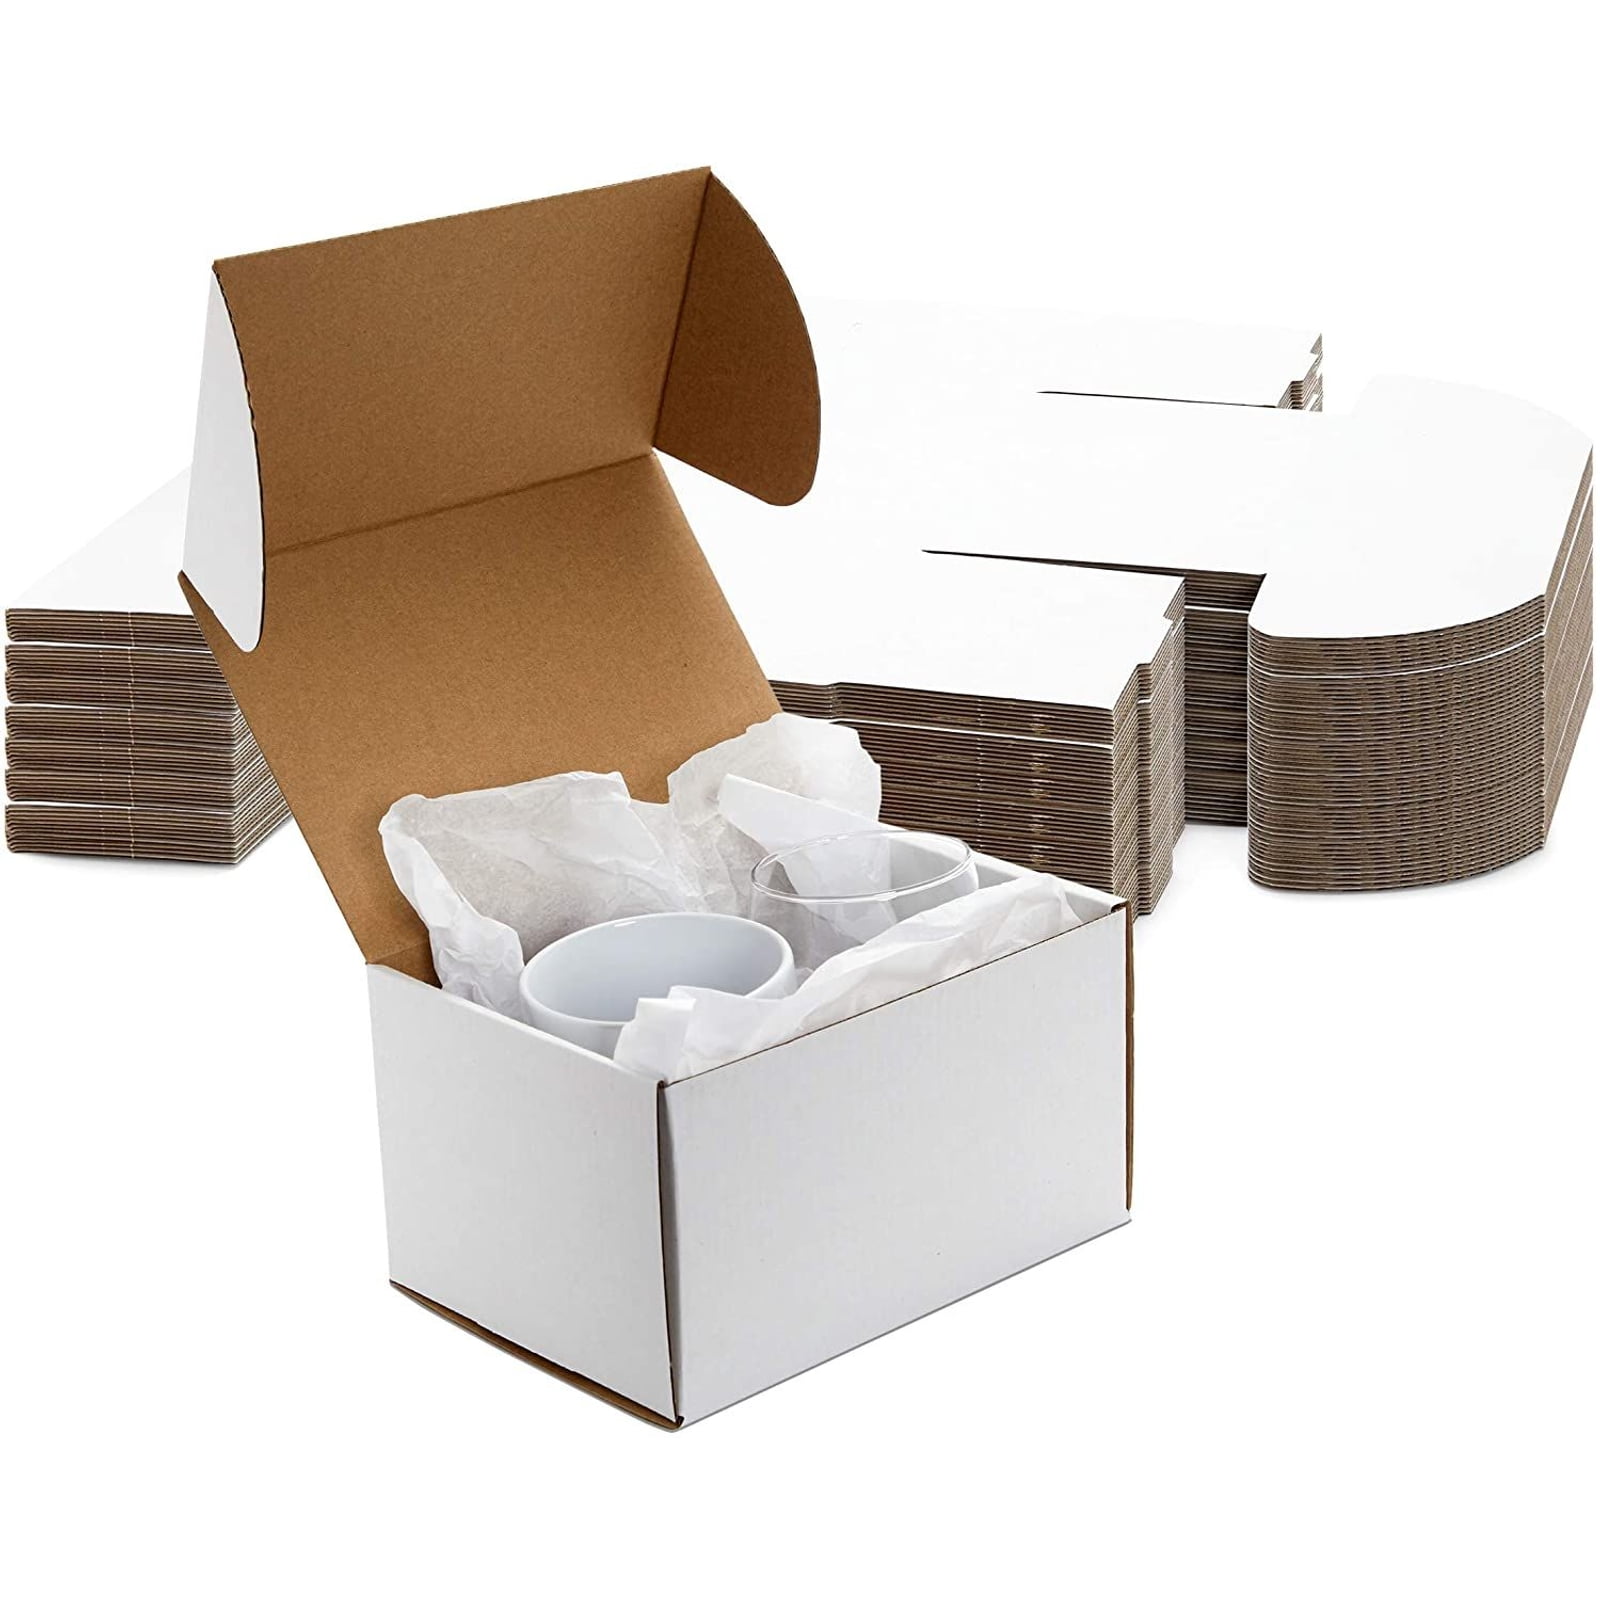 25 Pack 4x3x3 White Corrugated Shipping Mailer Packing Box Boxes 4" x 3" x 3" 